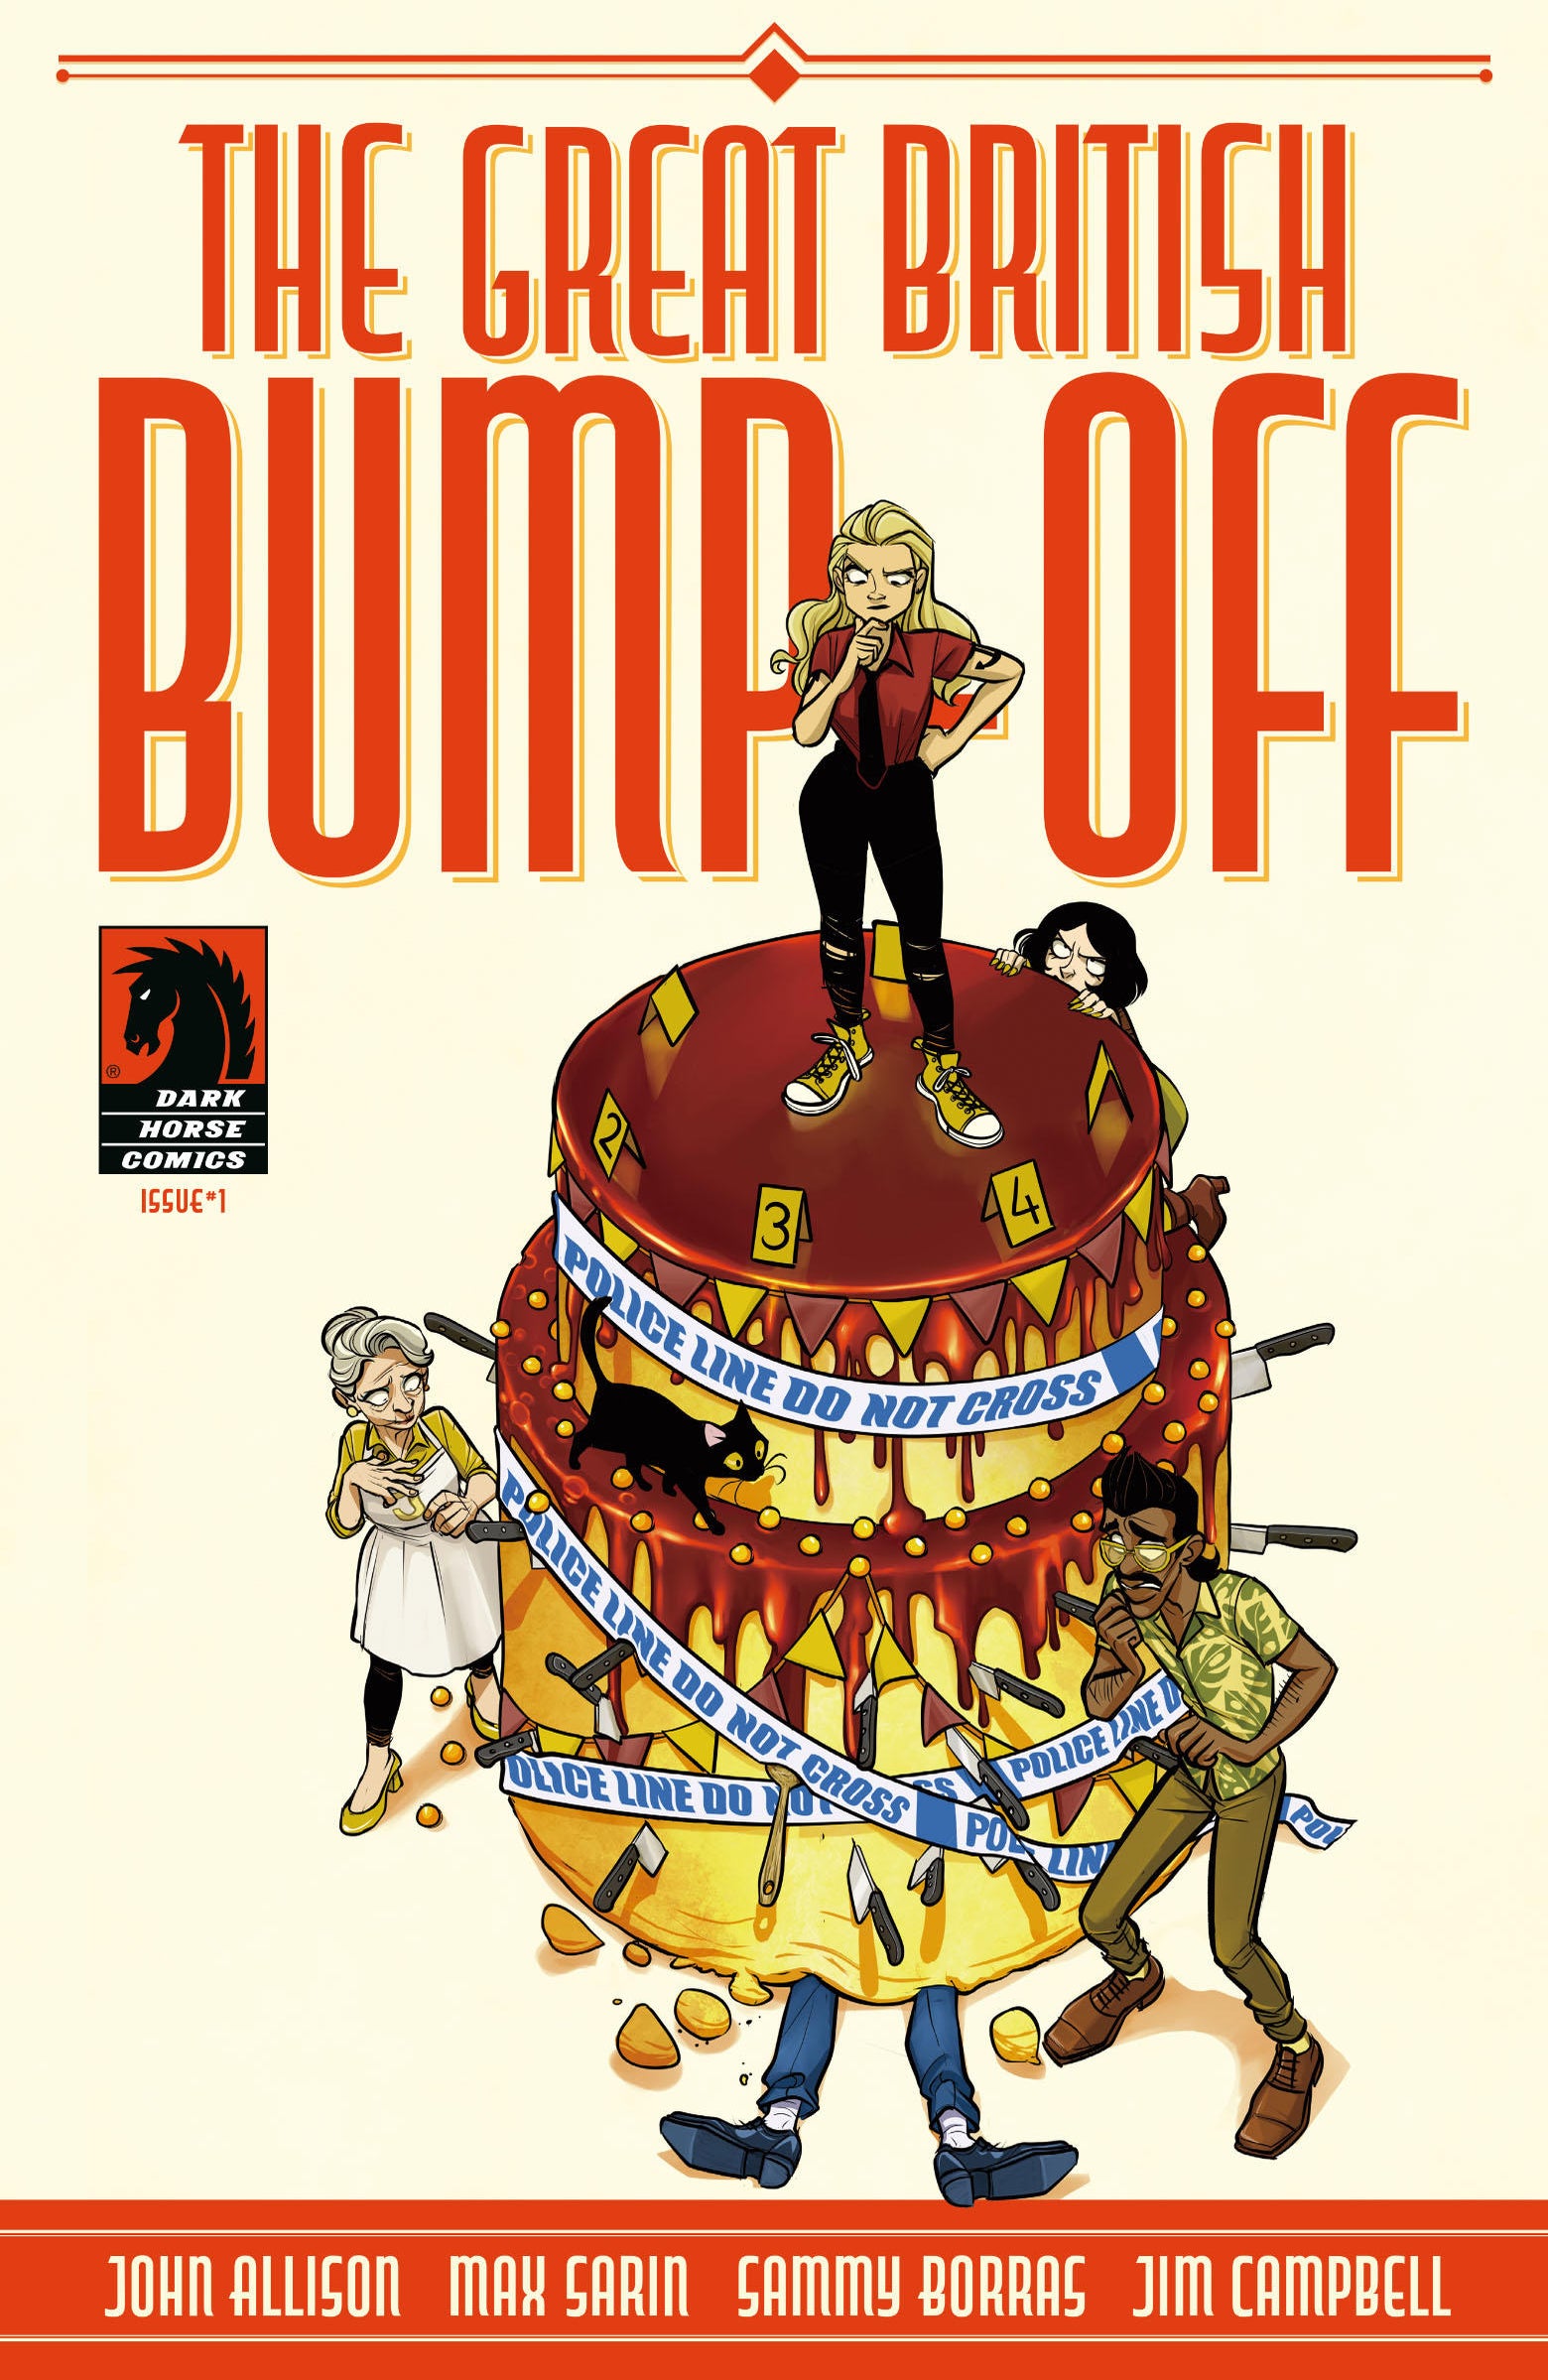 great-british-bake-off-cover-a.jpg